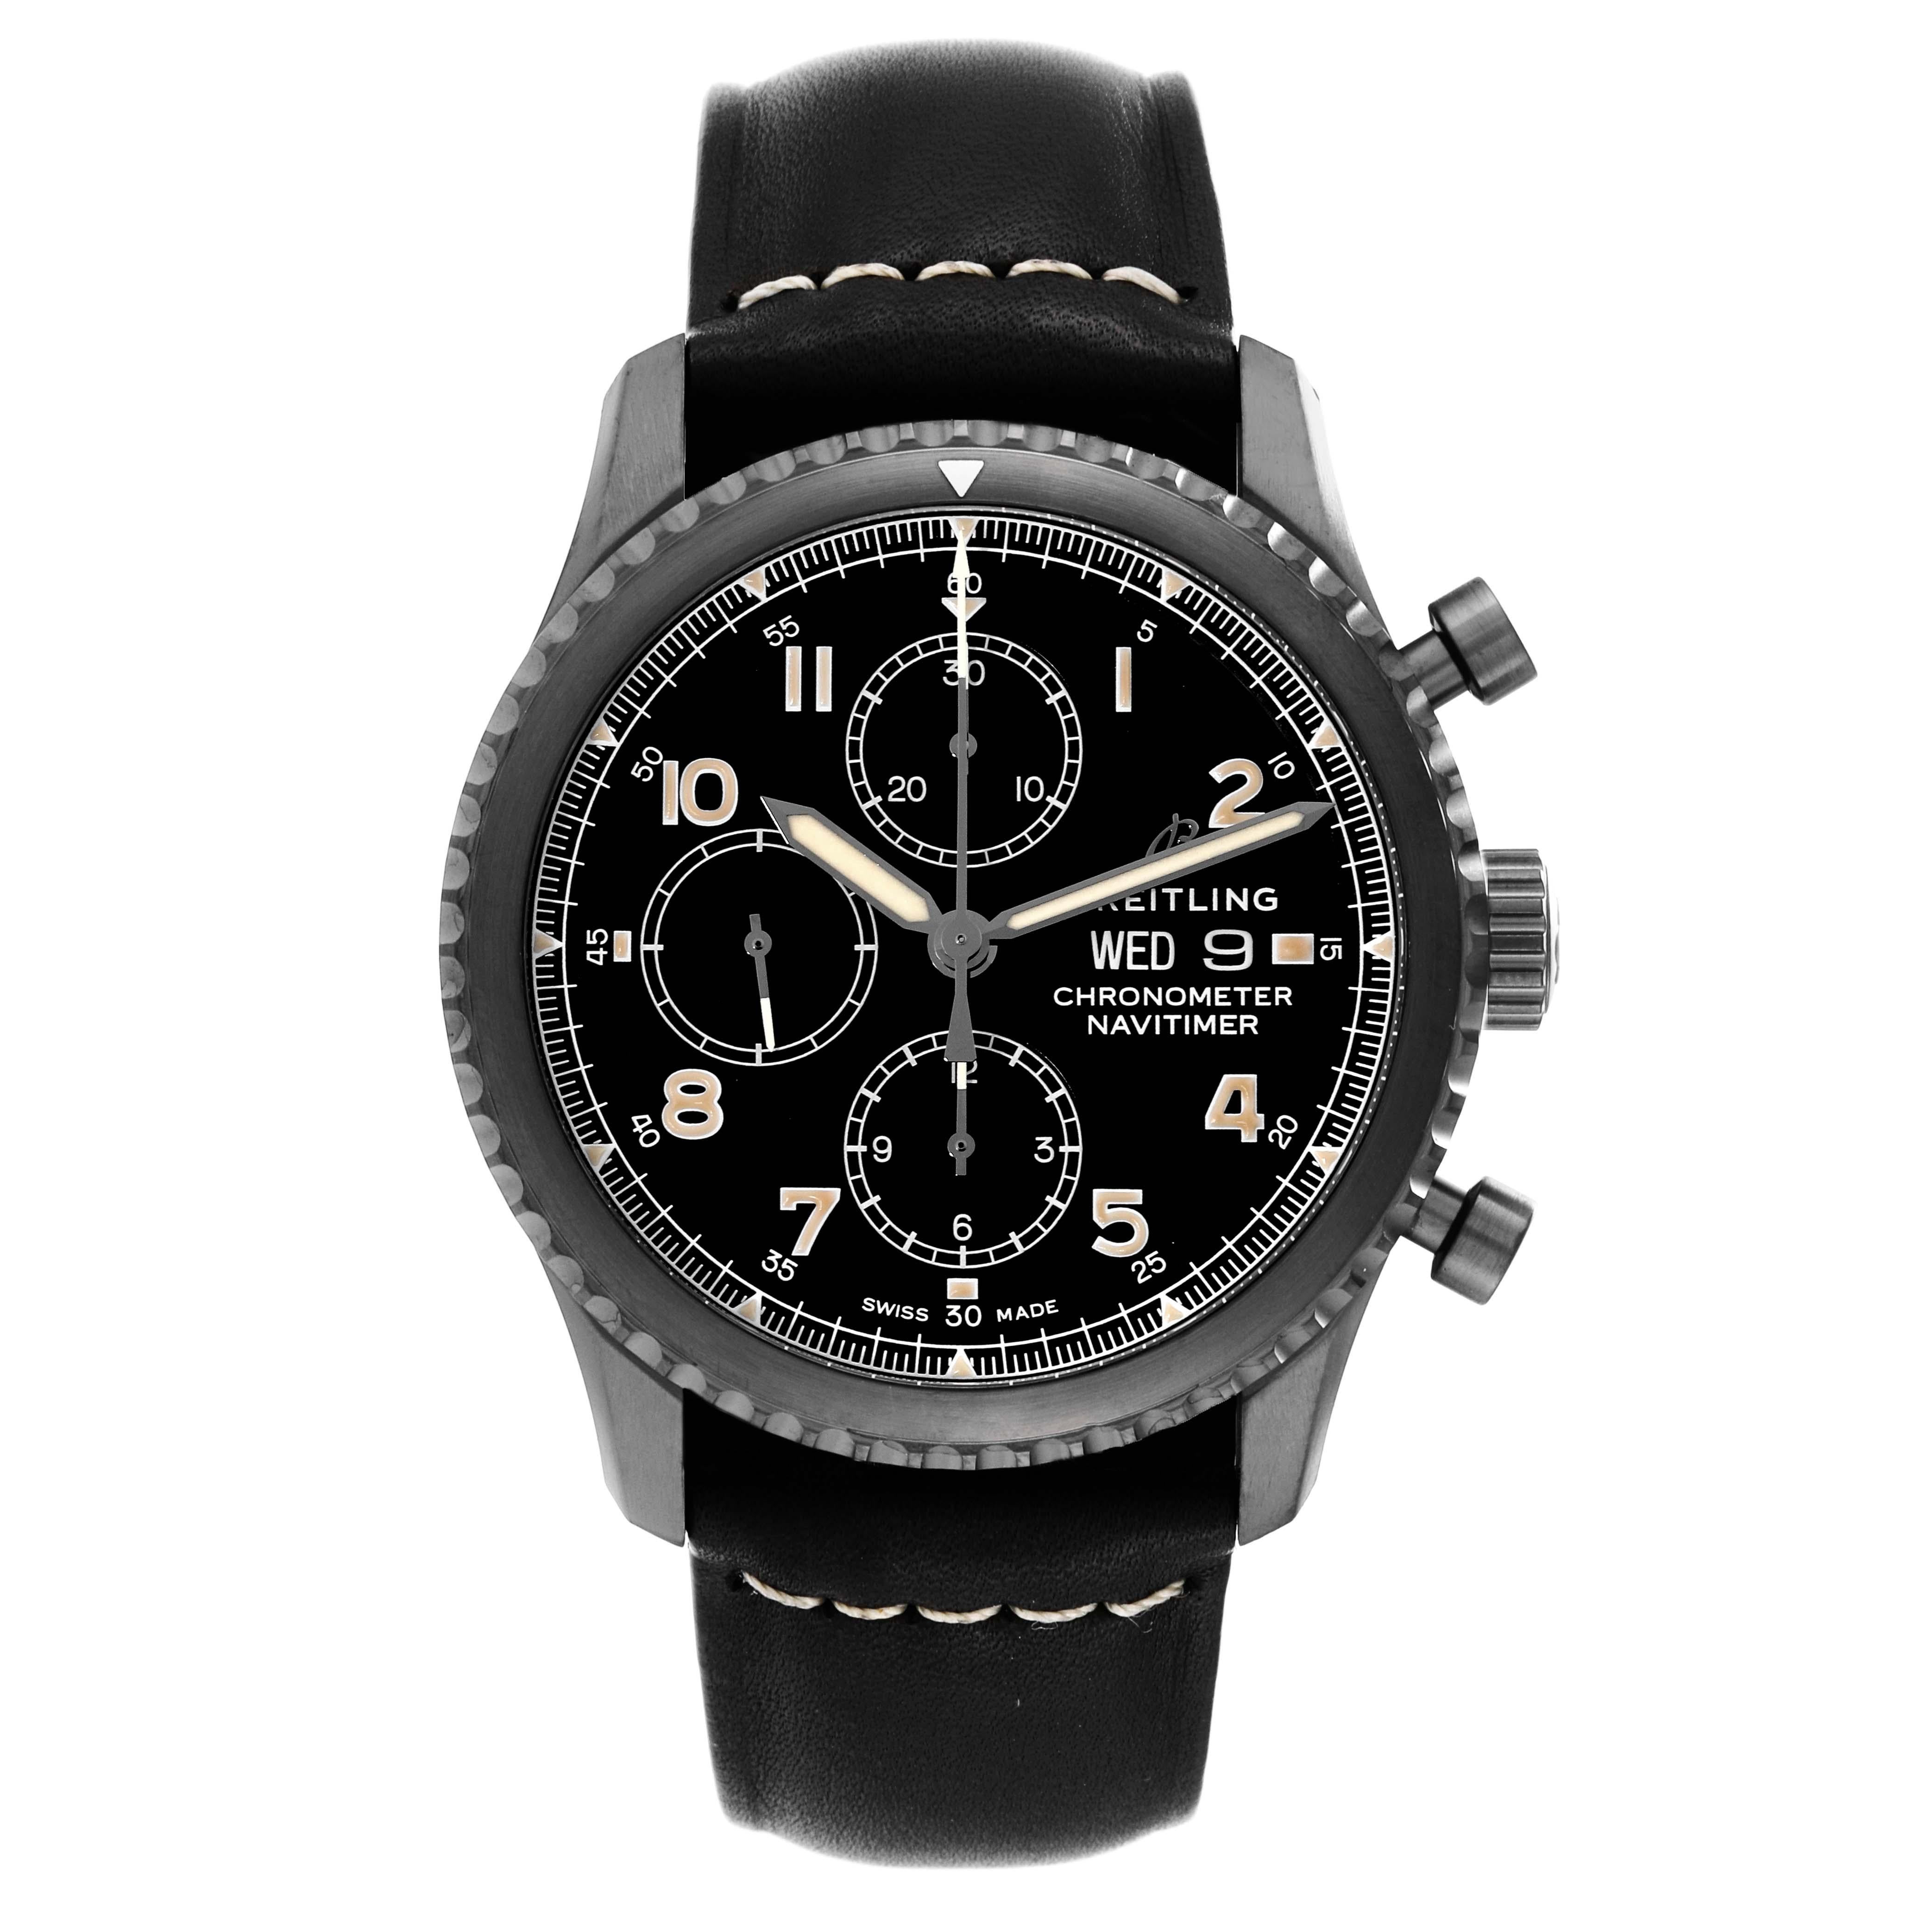 Breitling Navitimer 8 Chronograph 43 DLC Steel Mens Watch M13314 Unworn. Automatic self-winding movement. DLC-coated stainless steel case 43 mm in diameter and 14 mm in thickness. Screwed-down crown. Lapidated lugs. Black bidirectional rotating